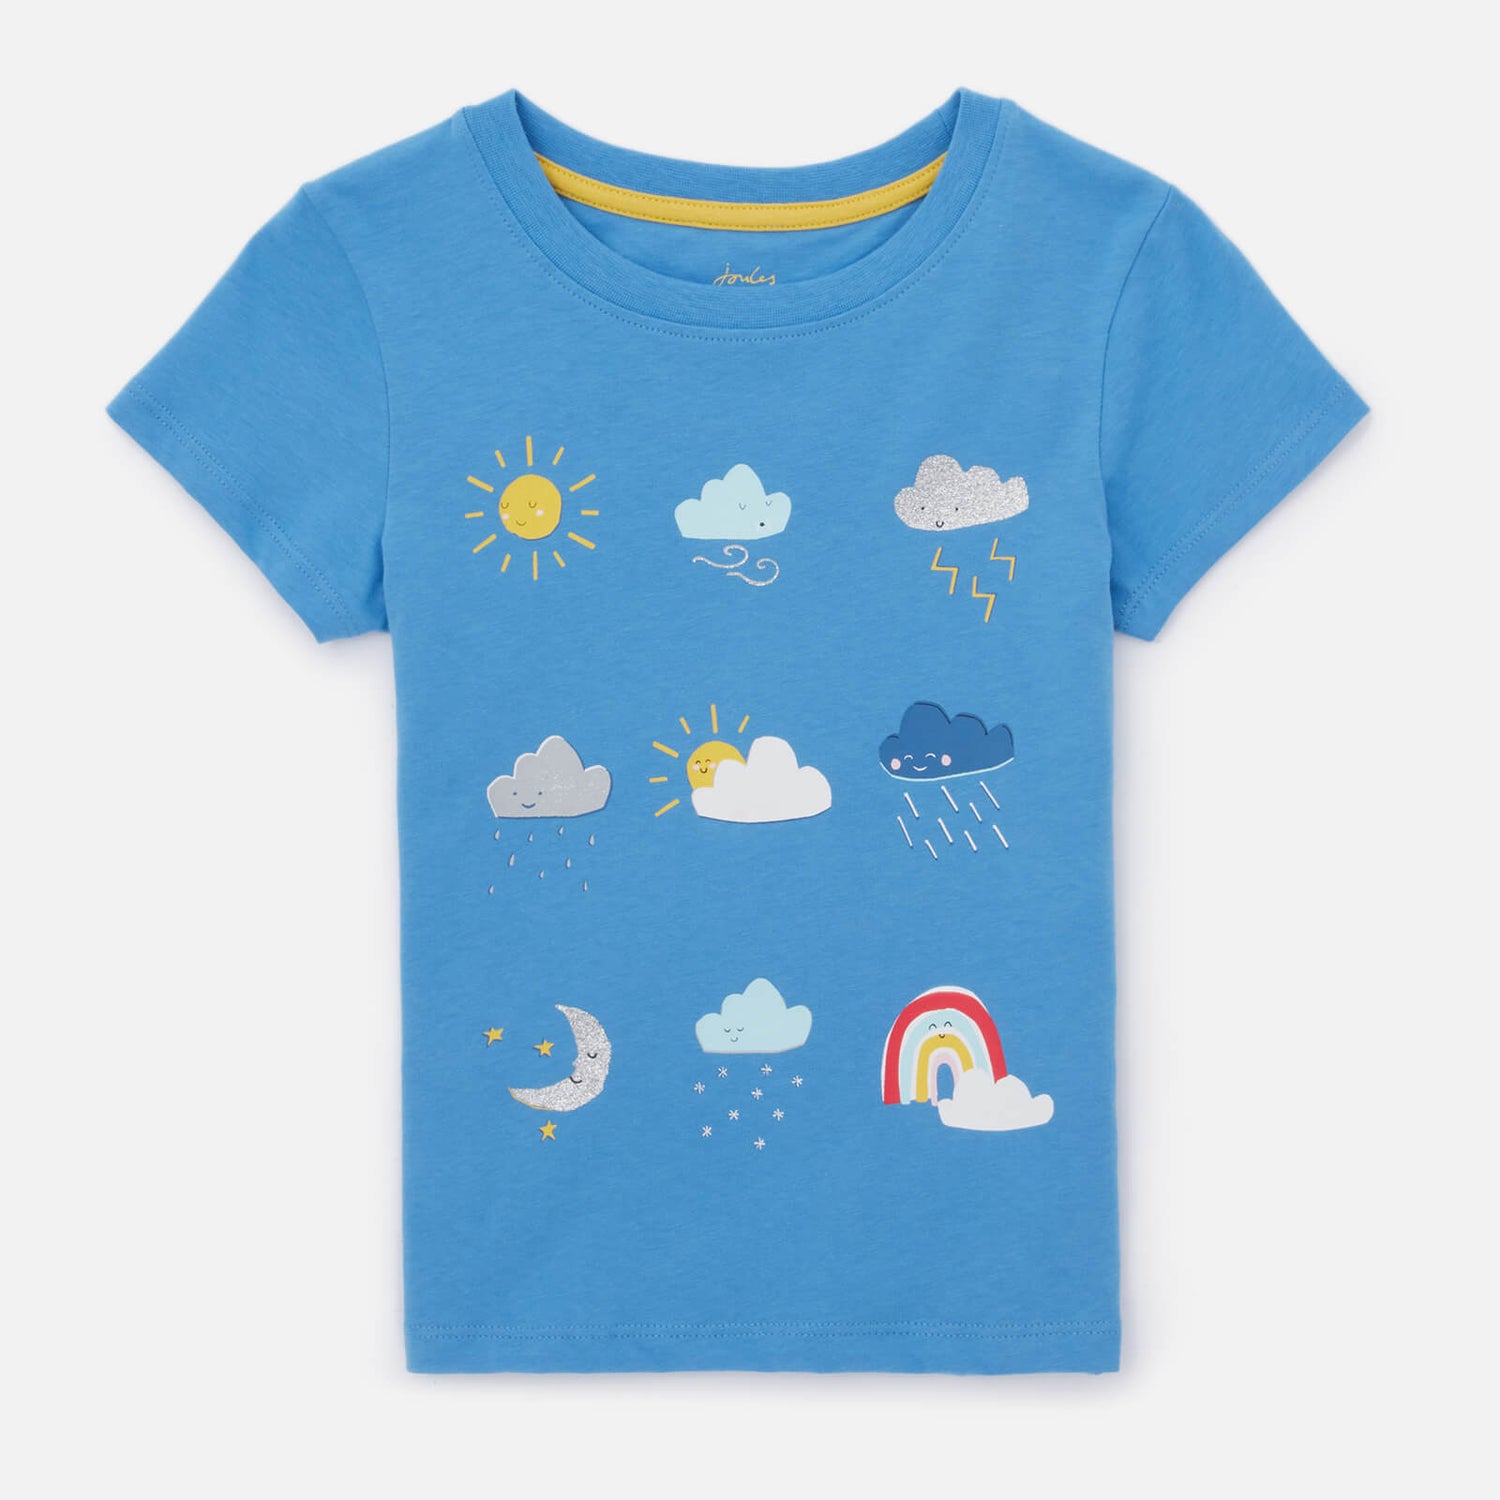 Joules Kids' Short Sleeve Artwork T-Shirt - Blue Weather Icons - 3 Years